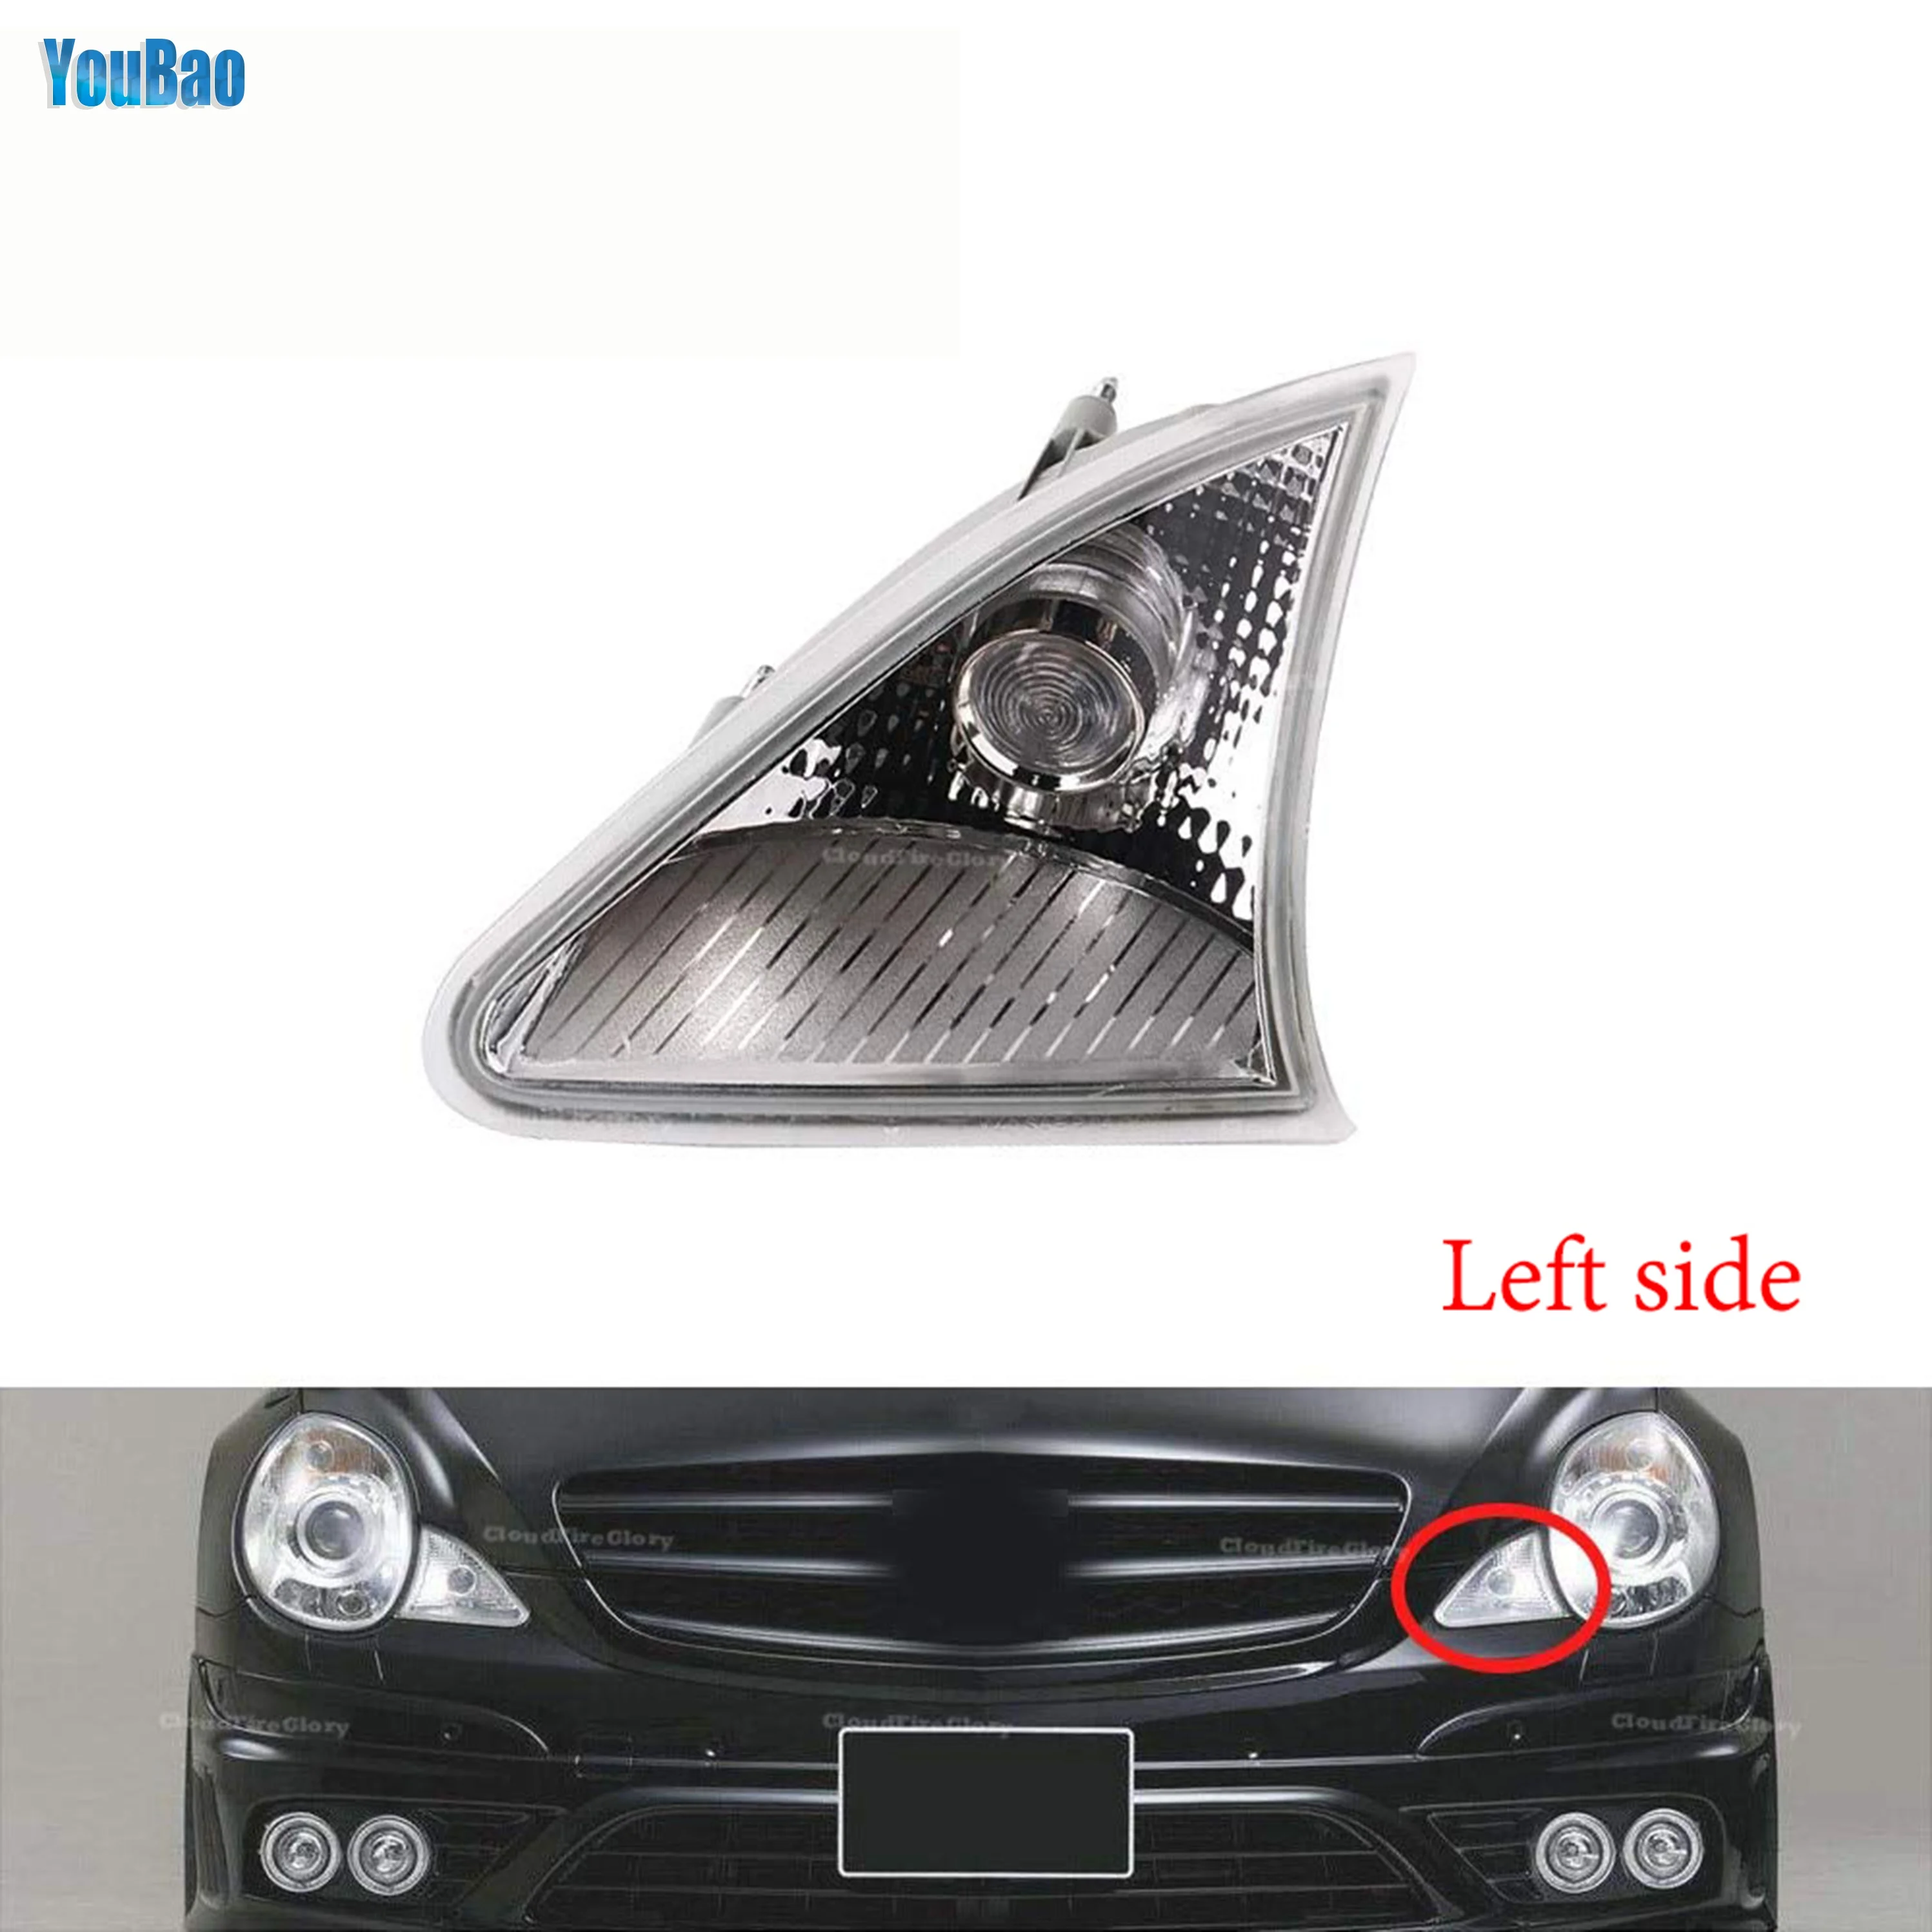 1Pair High Quality OE Position Light Front Parking Lamp for Mercedes Benz W251 2006-2009 R320 R350 R500 R63